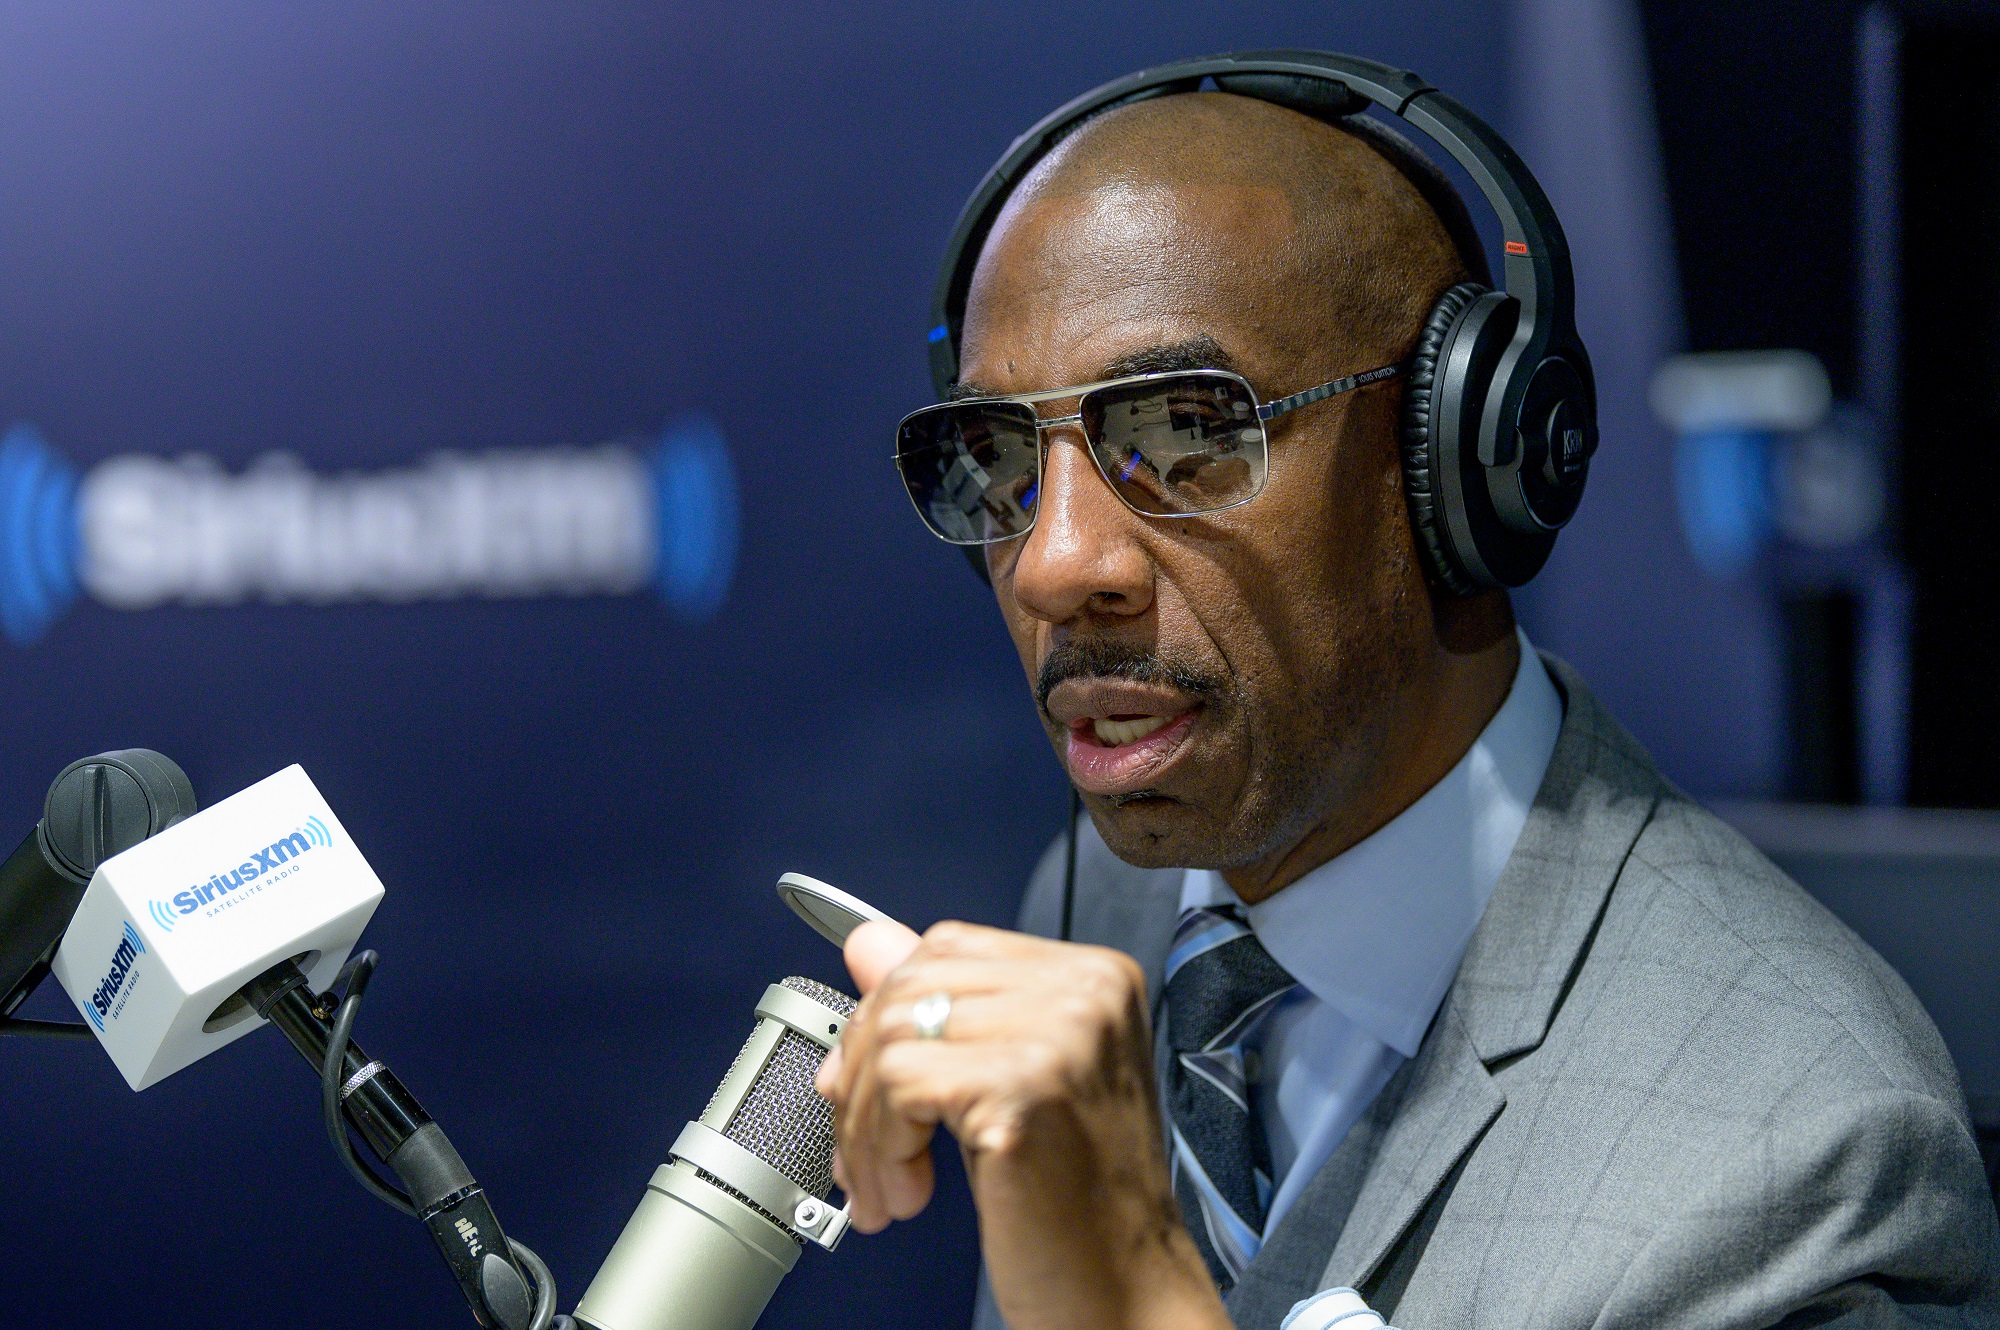  J. B. Smoove of Curb Your Enthusiasm